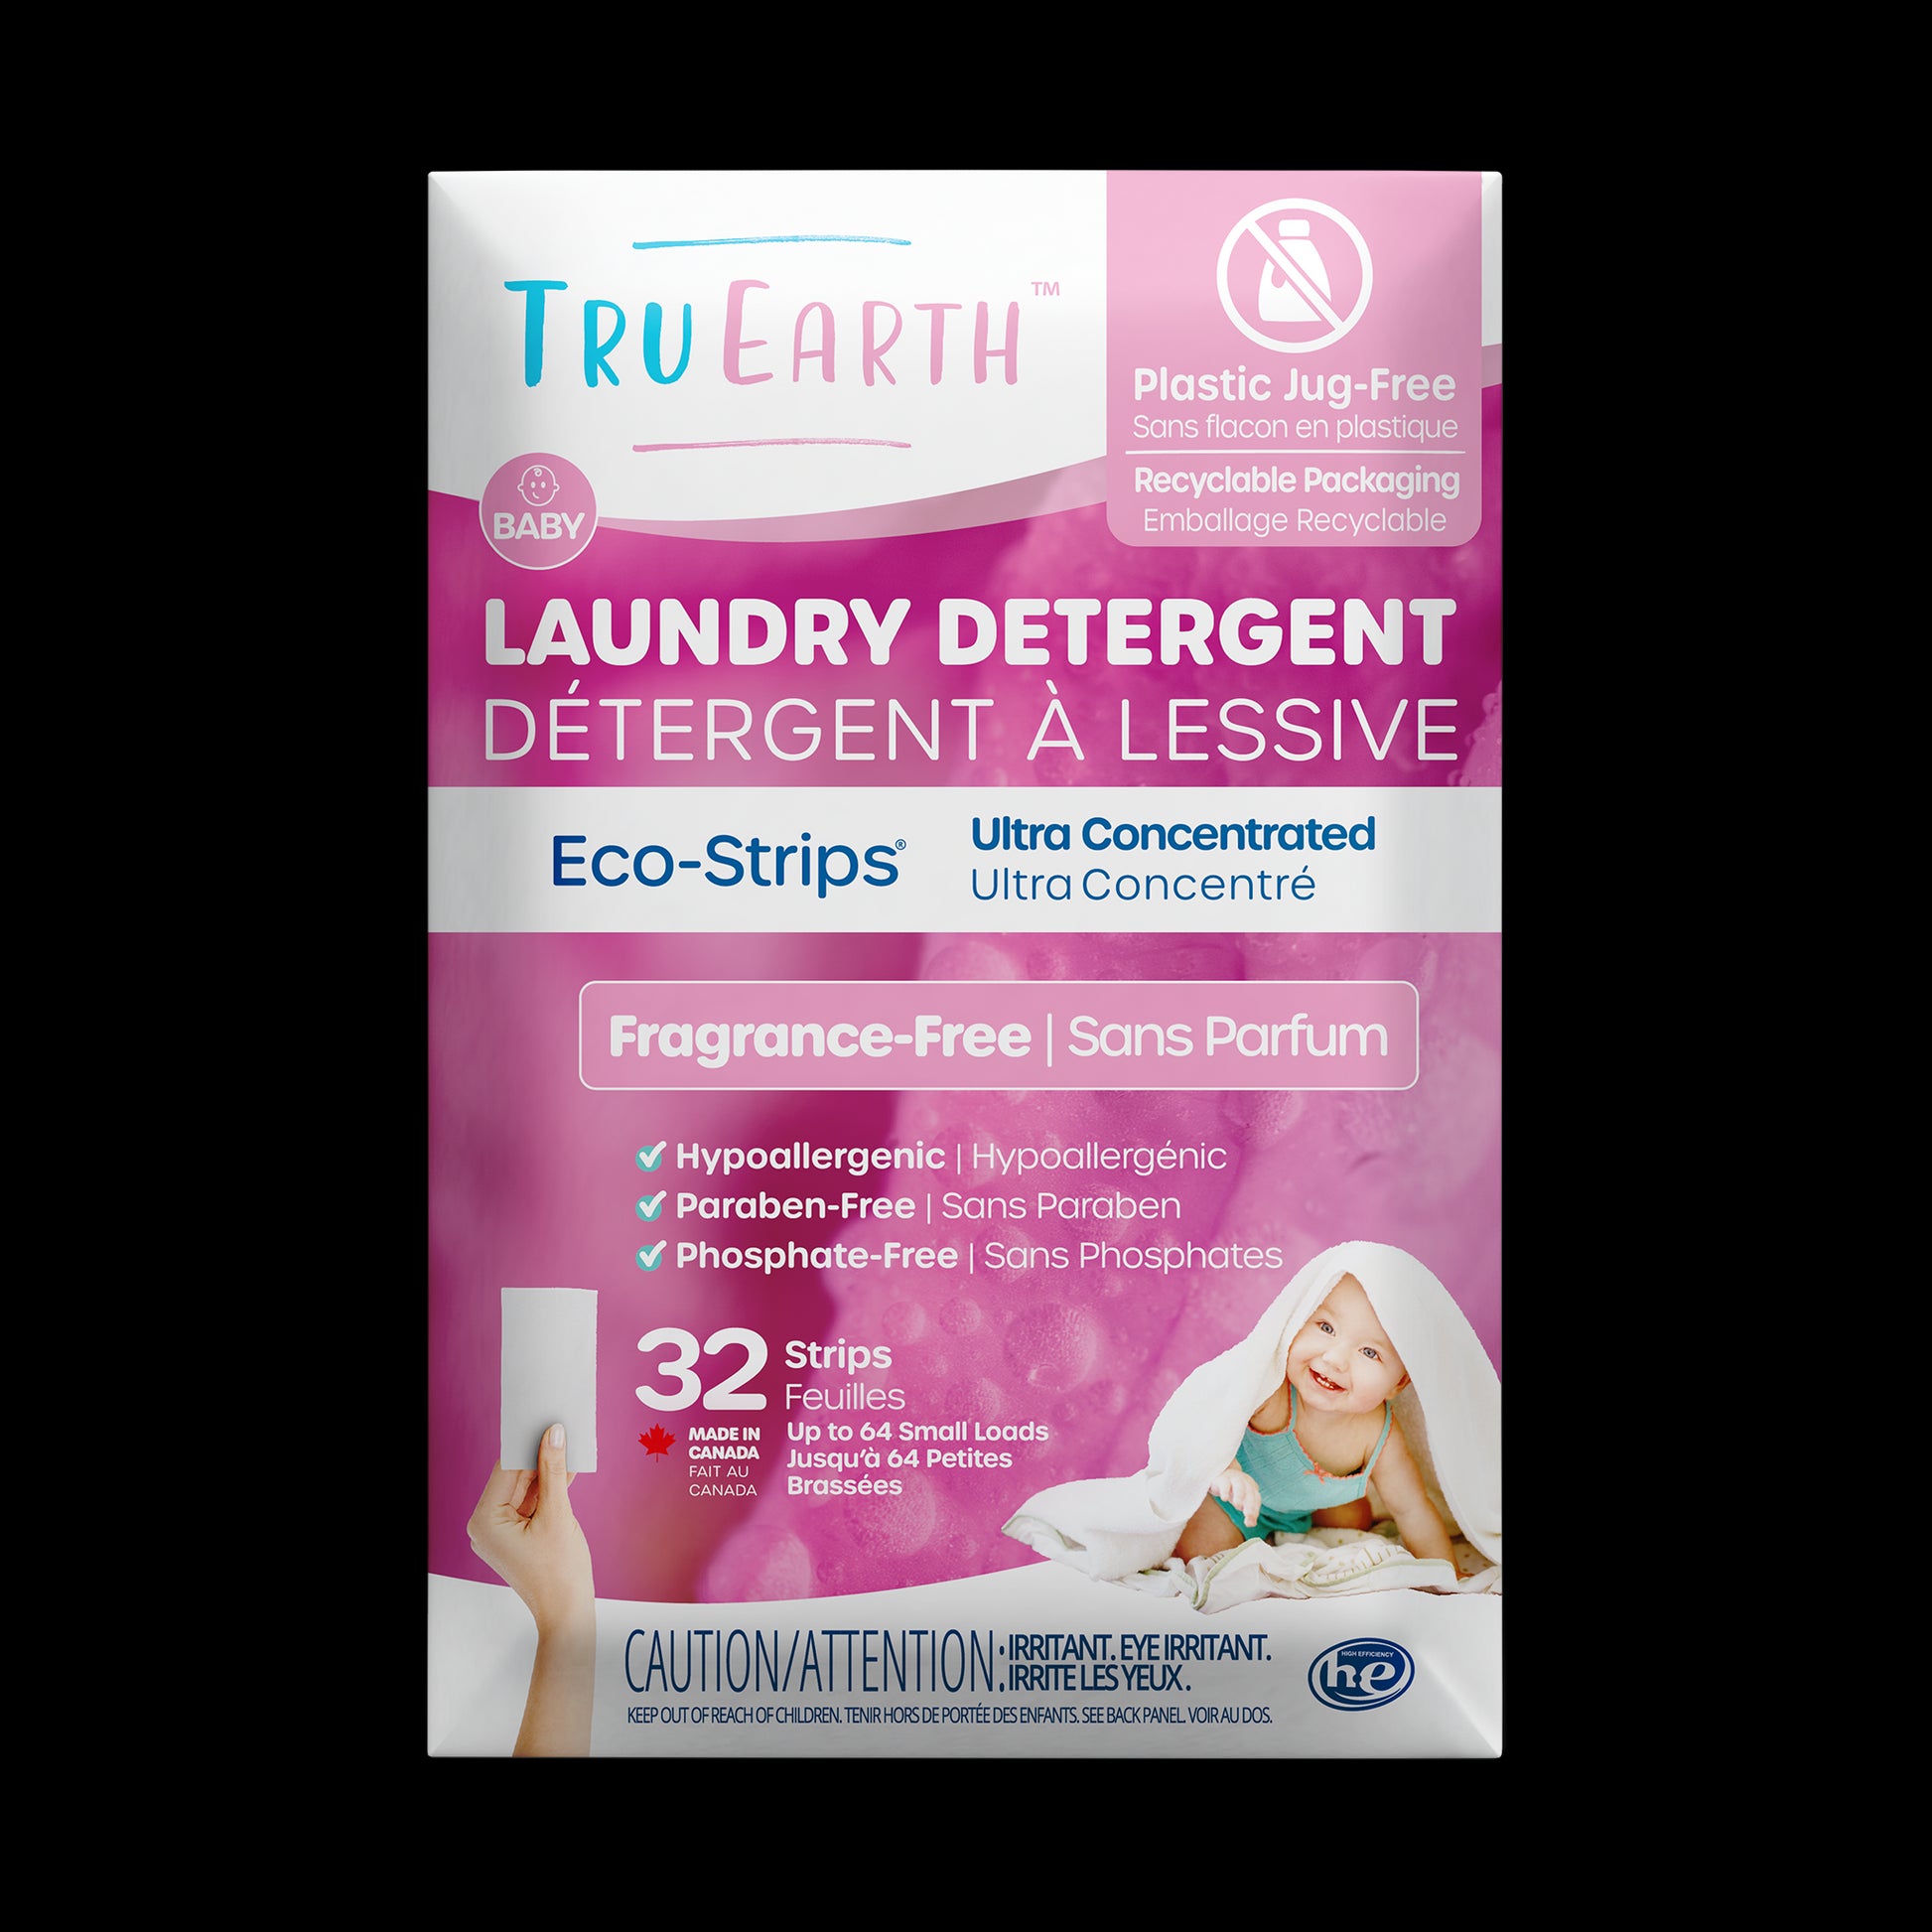 TruEarth Laundry Detergent Baby Fragrance-Free Front of Package